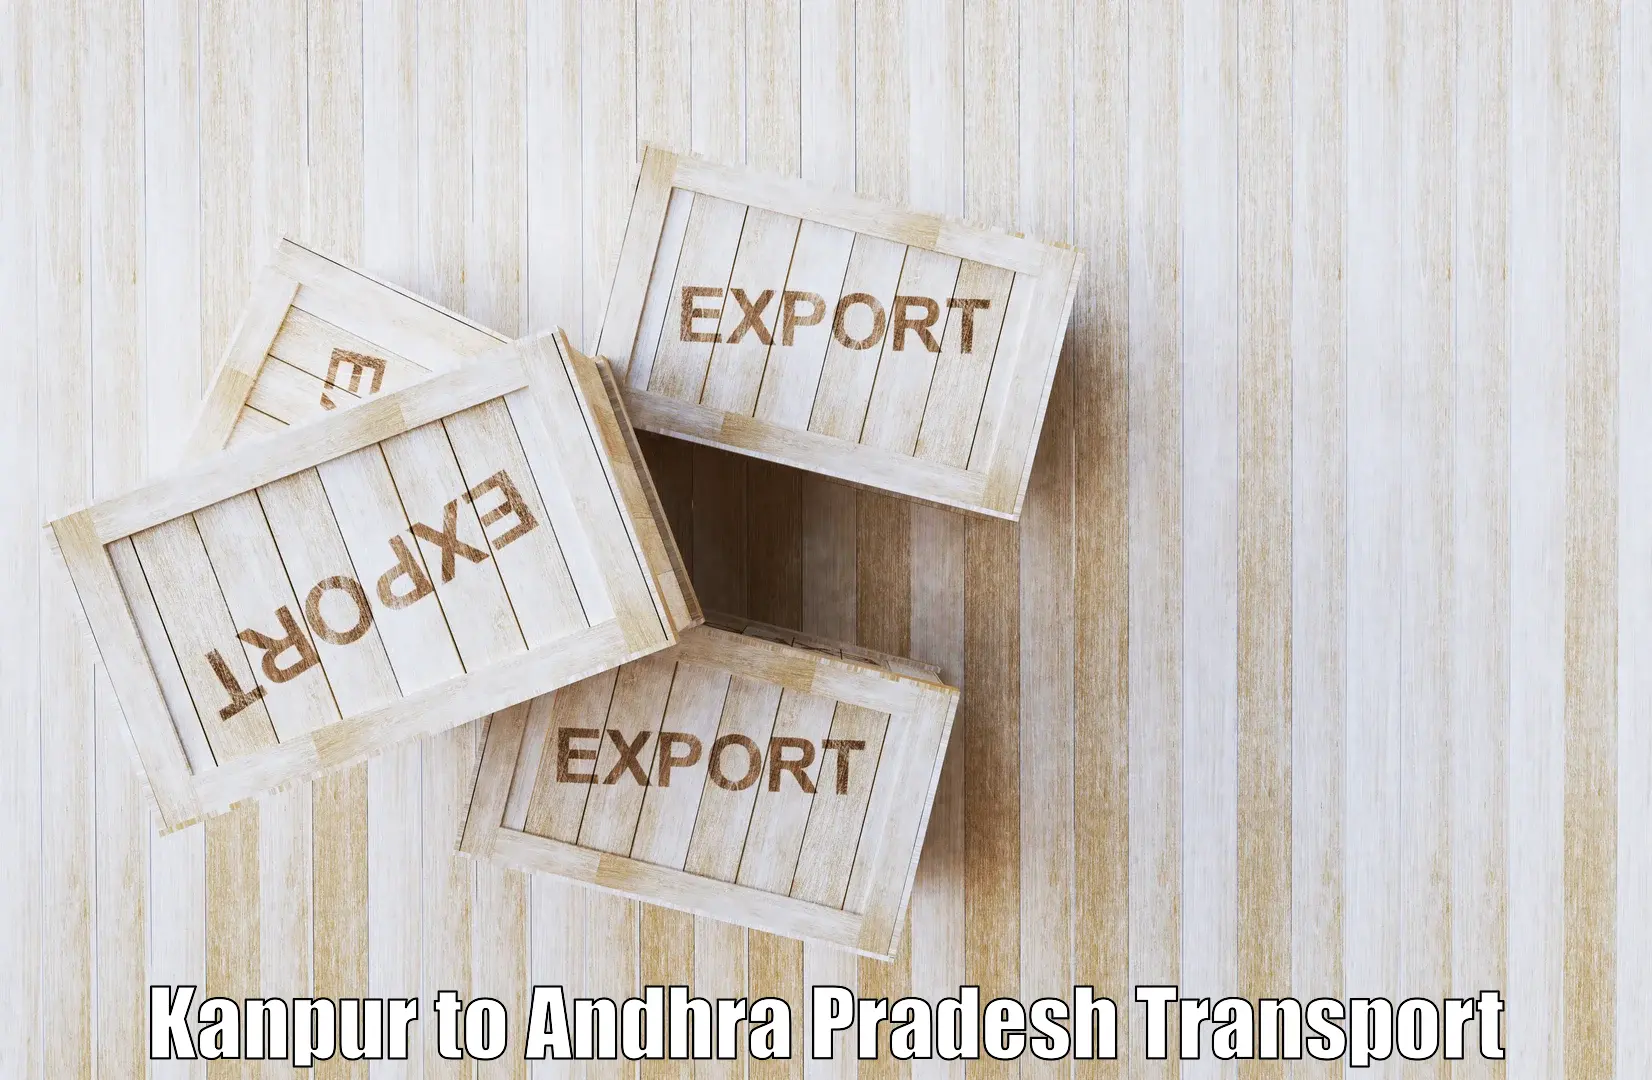 Daily parcel service transport in Kanpur to Andhra Pradesh